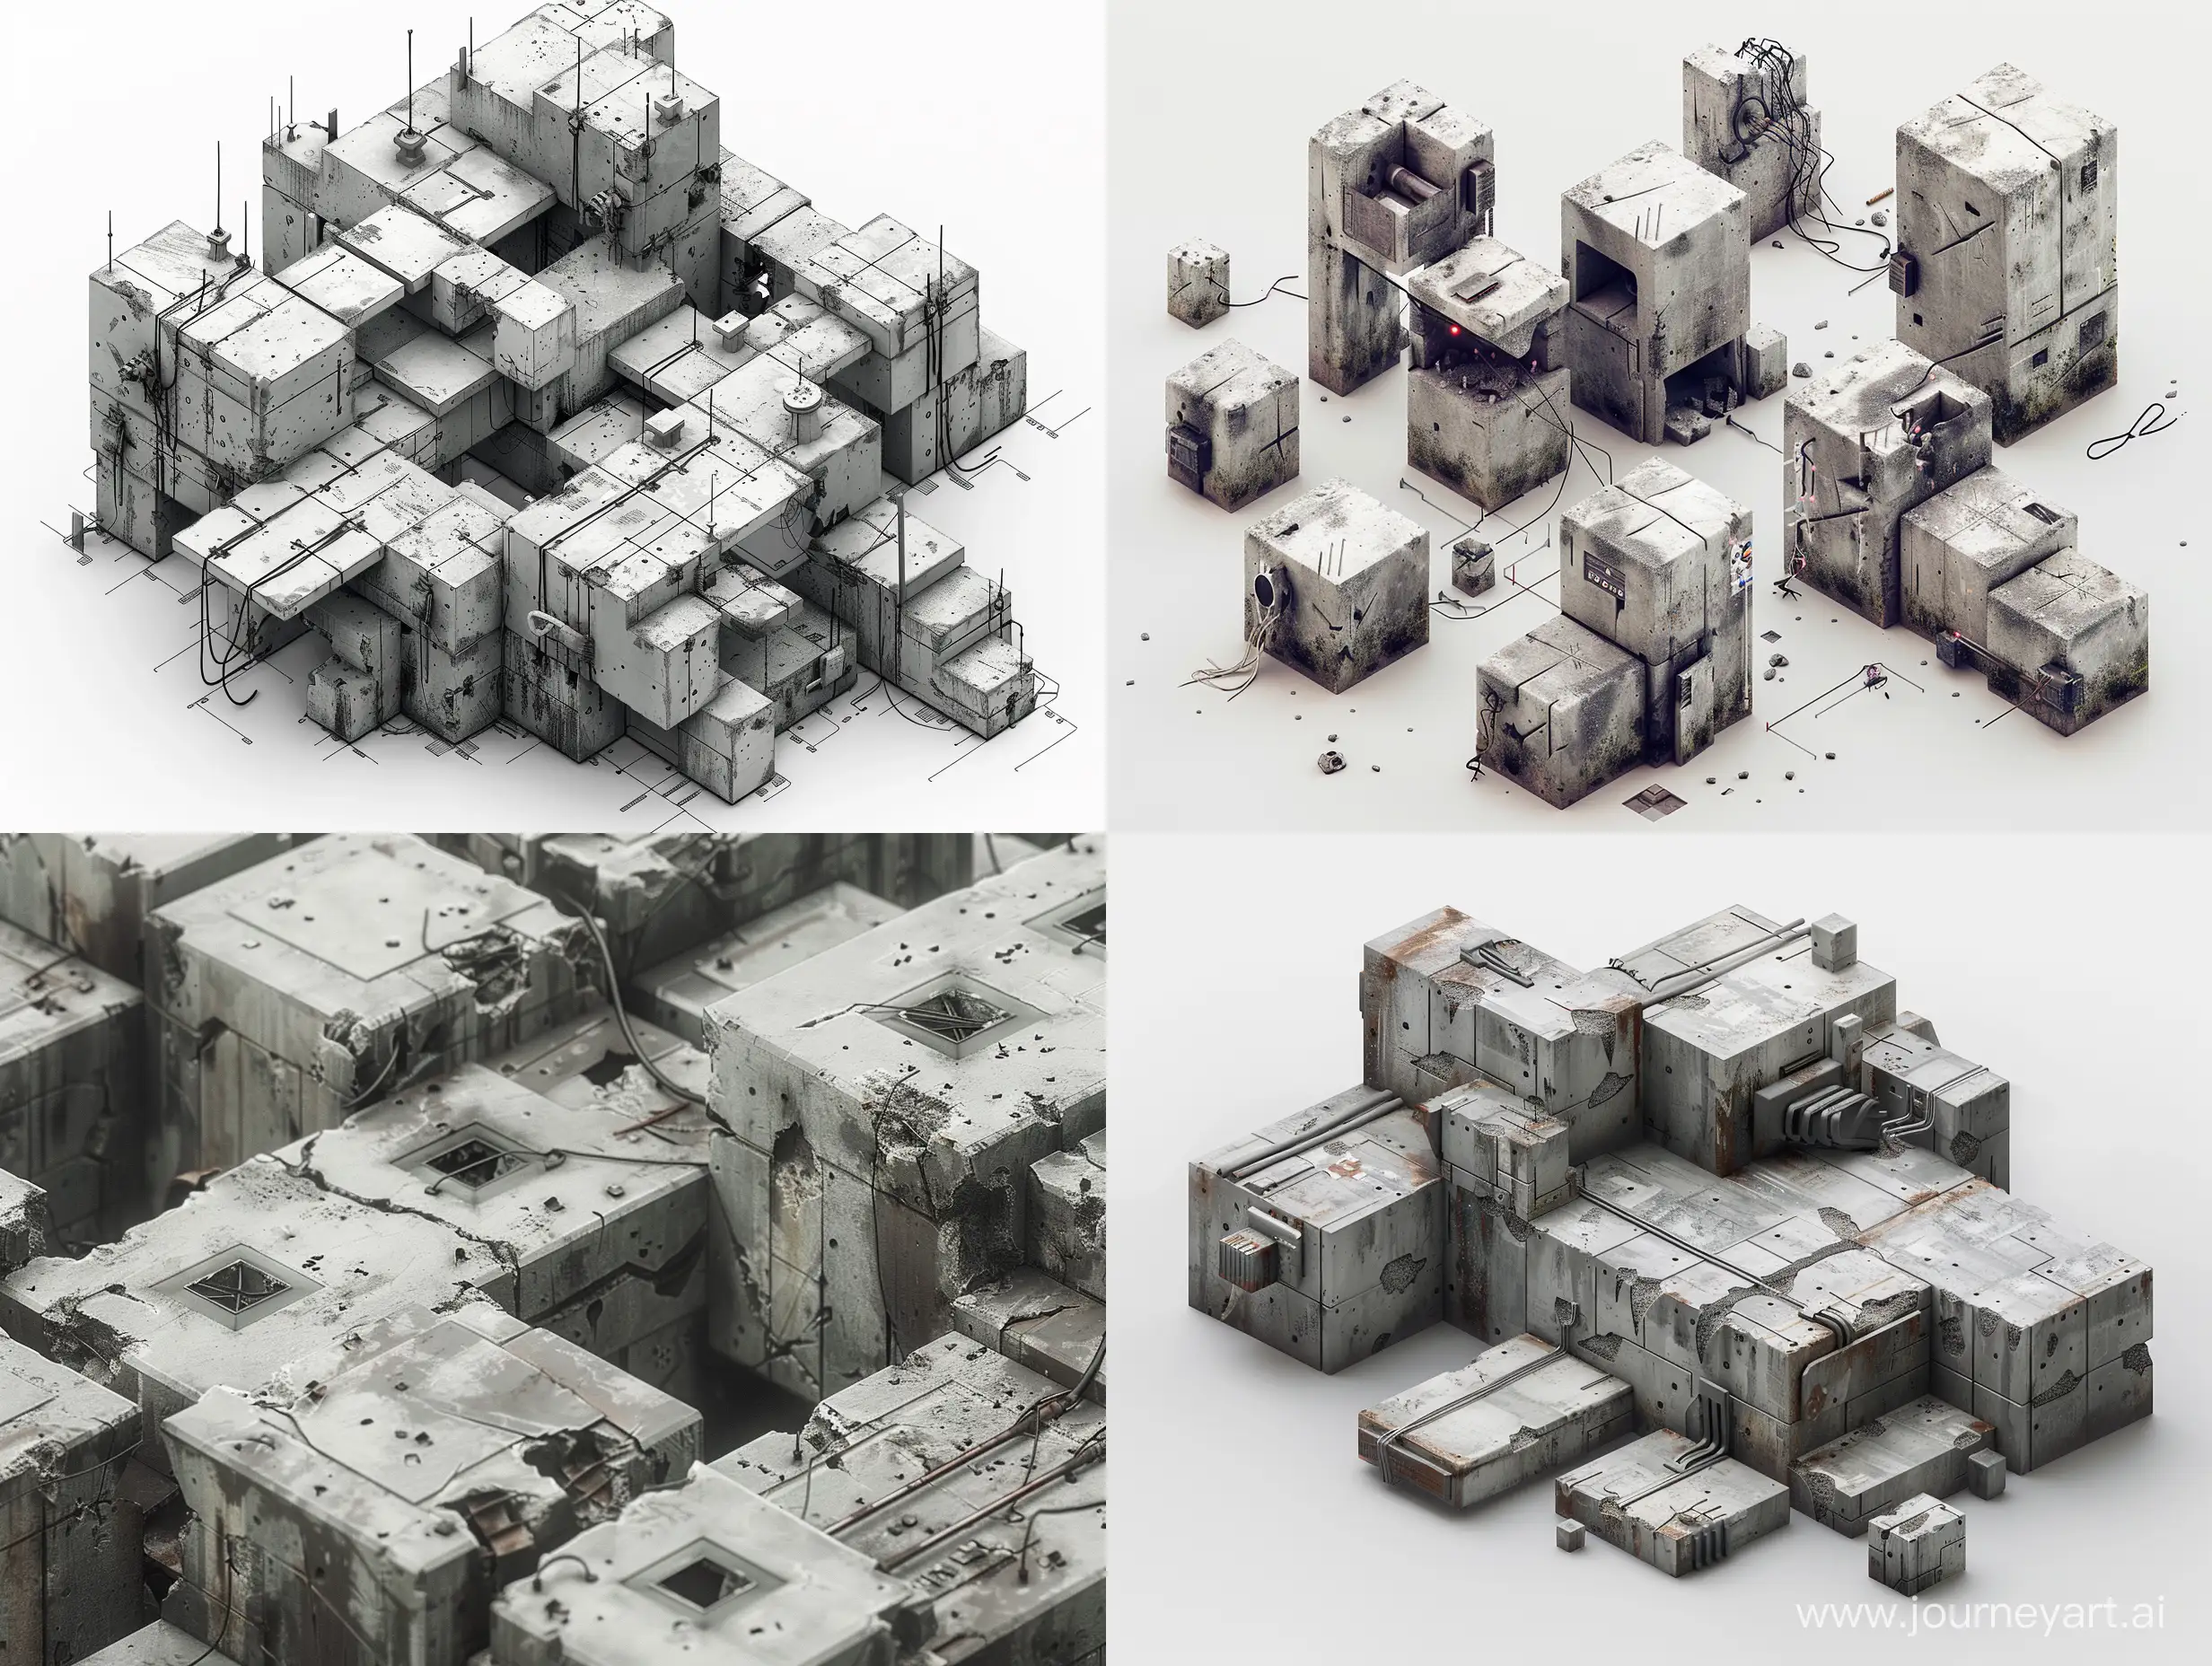 PostApocalyptic-Industrial-Ruins-in-Unreal-Engine-Concrete-Blocks-and-Steel-Parts-Sprite-Map